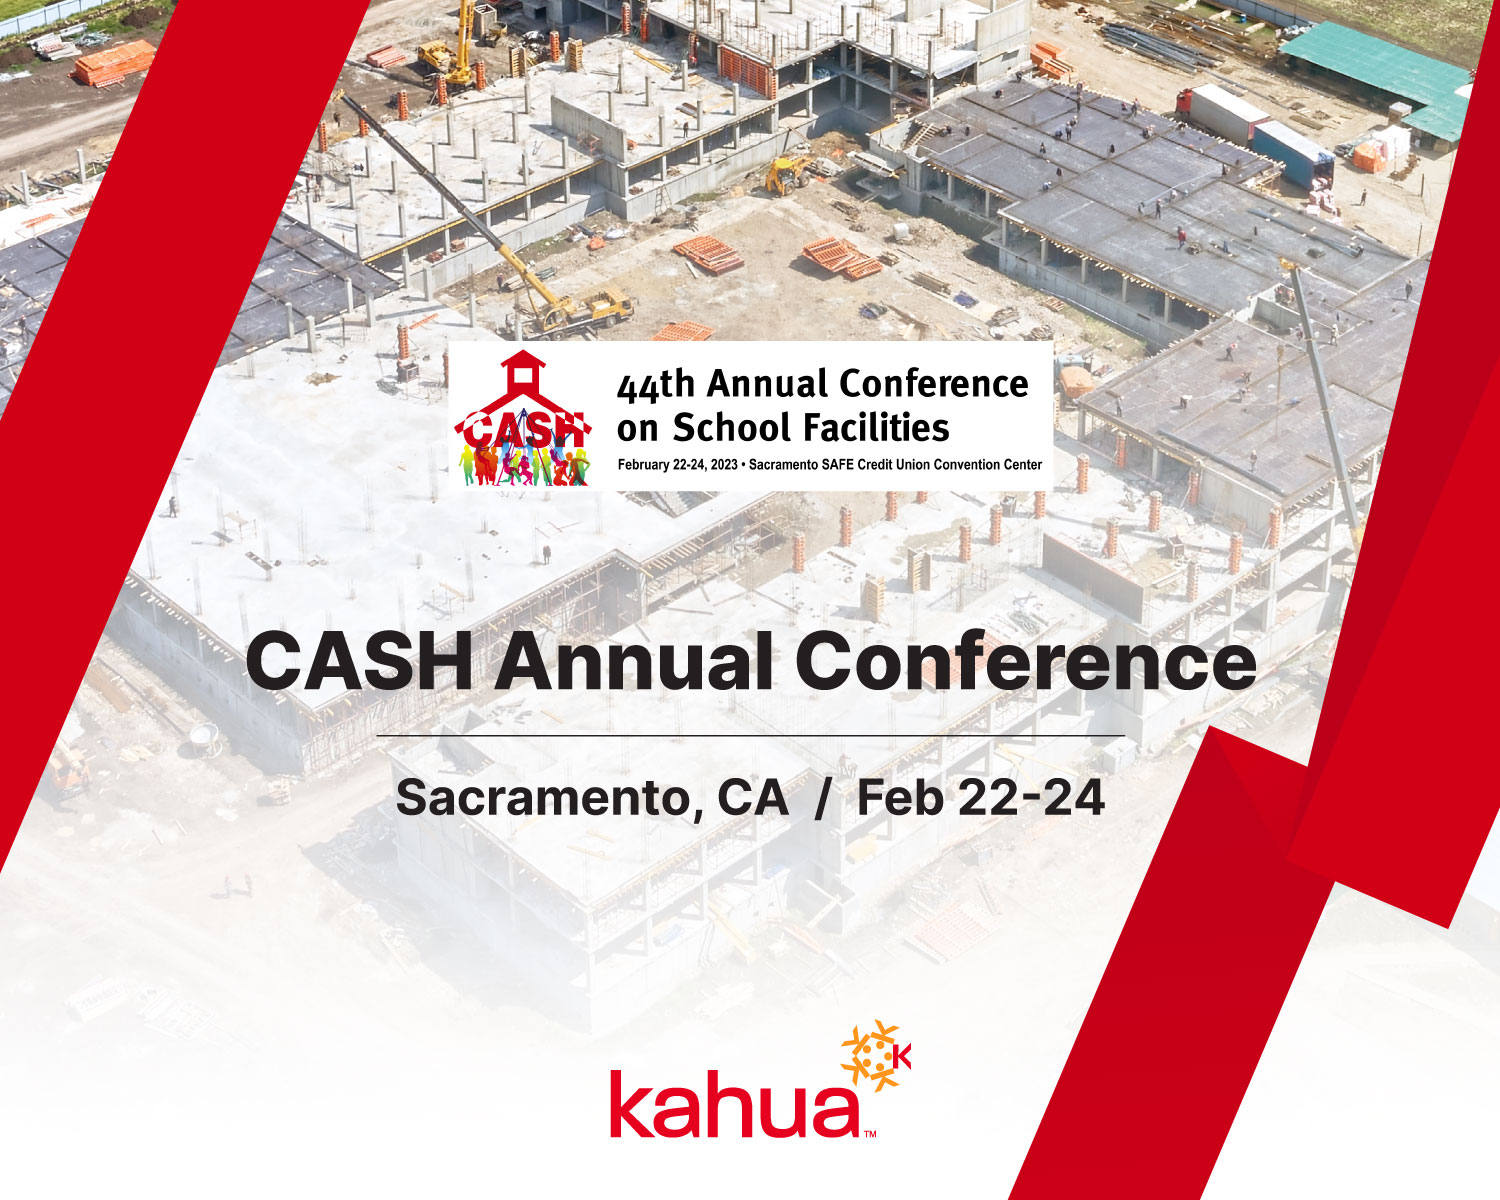 CASH Annual Conference Construction Events Kahua Event